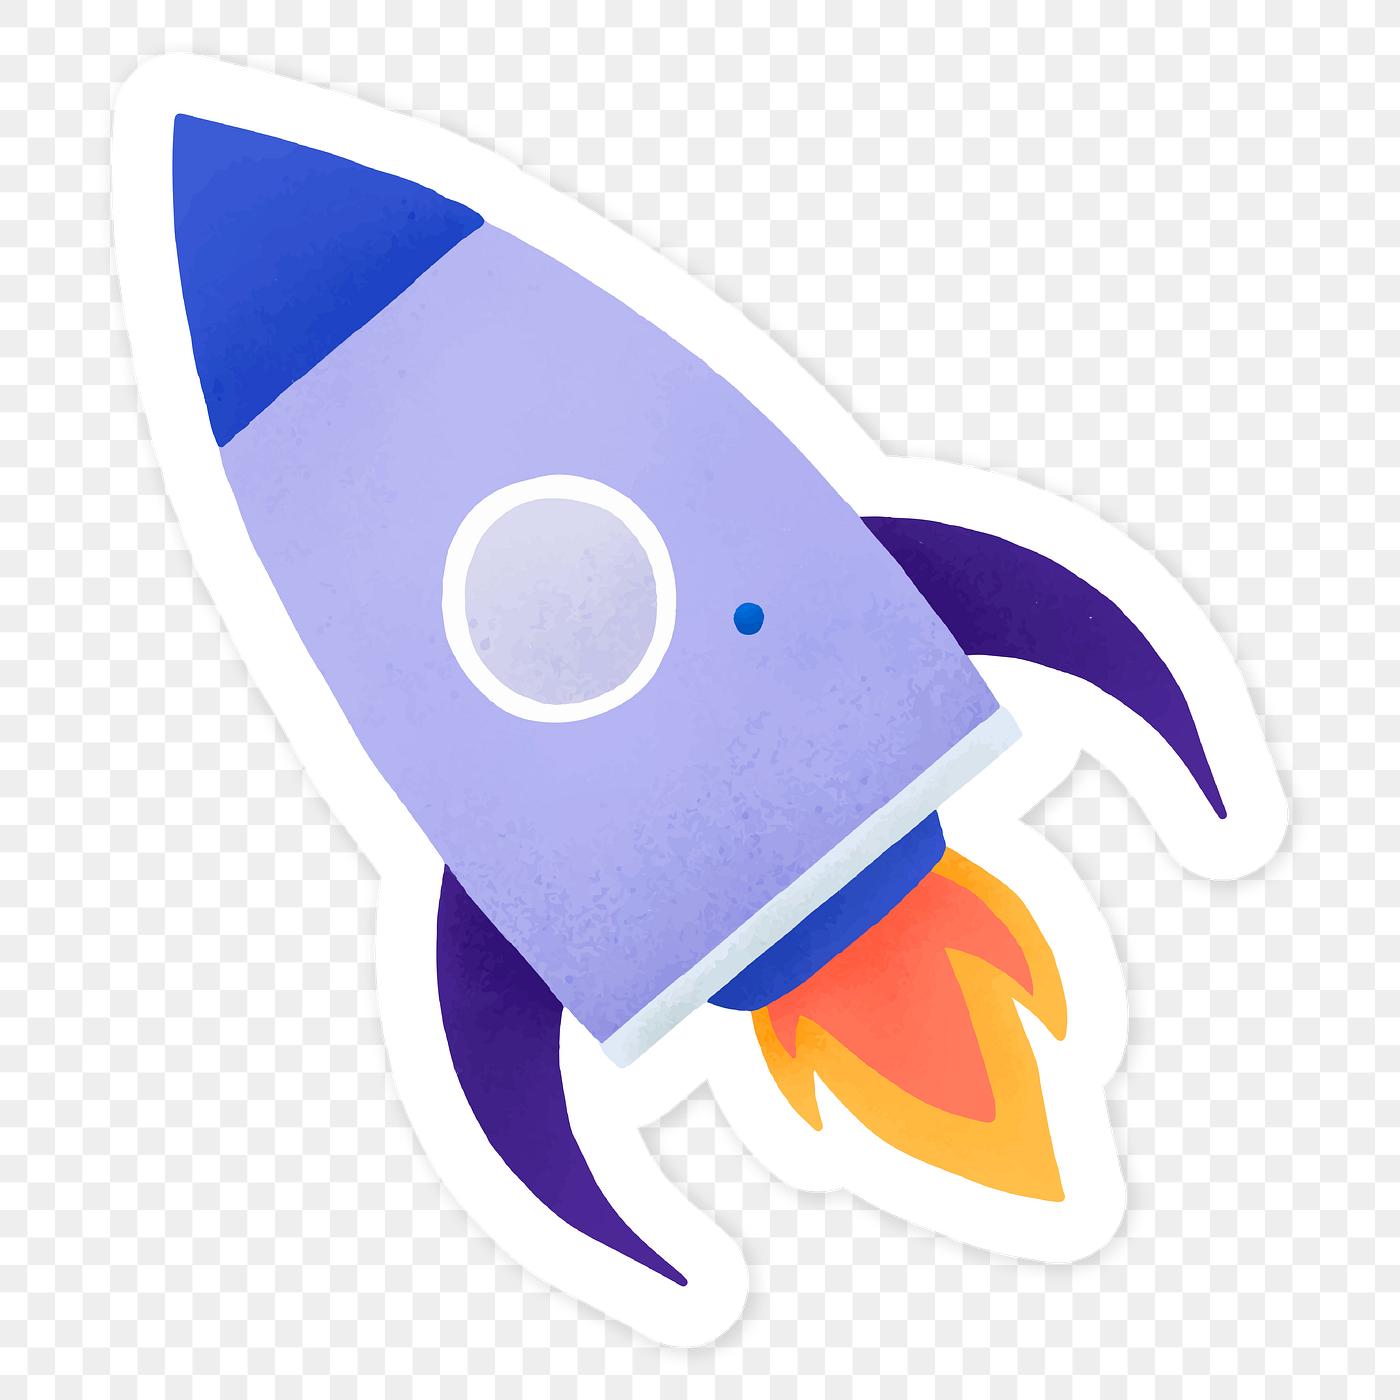 Rocket ship icon png | Royalty free stock transparent png - 2026412